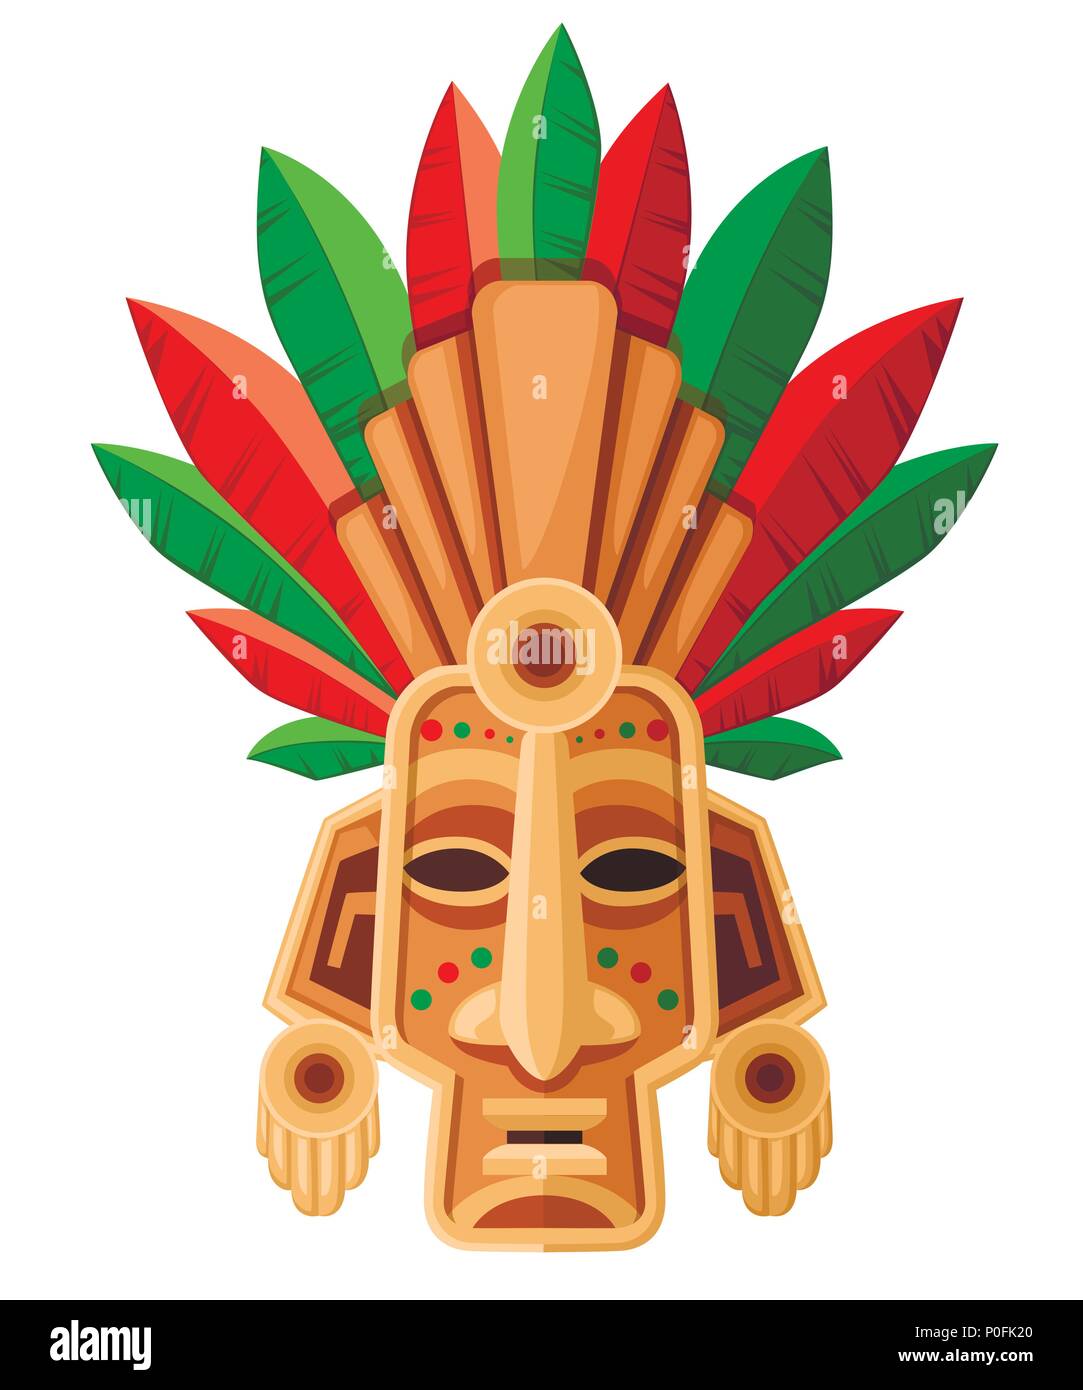 Ethnic tribal mask. Mask with green and red leaf. Ritual headdress, colorful. Vector illustration isolated on white background. Stock Vector